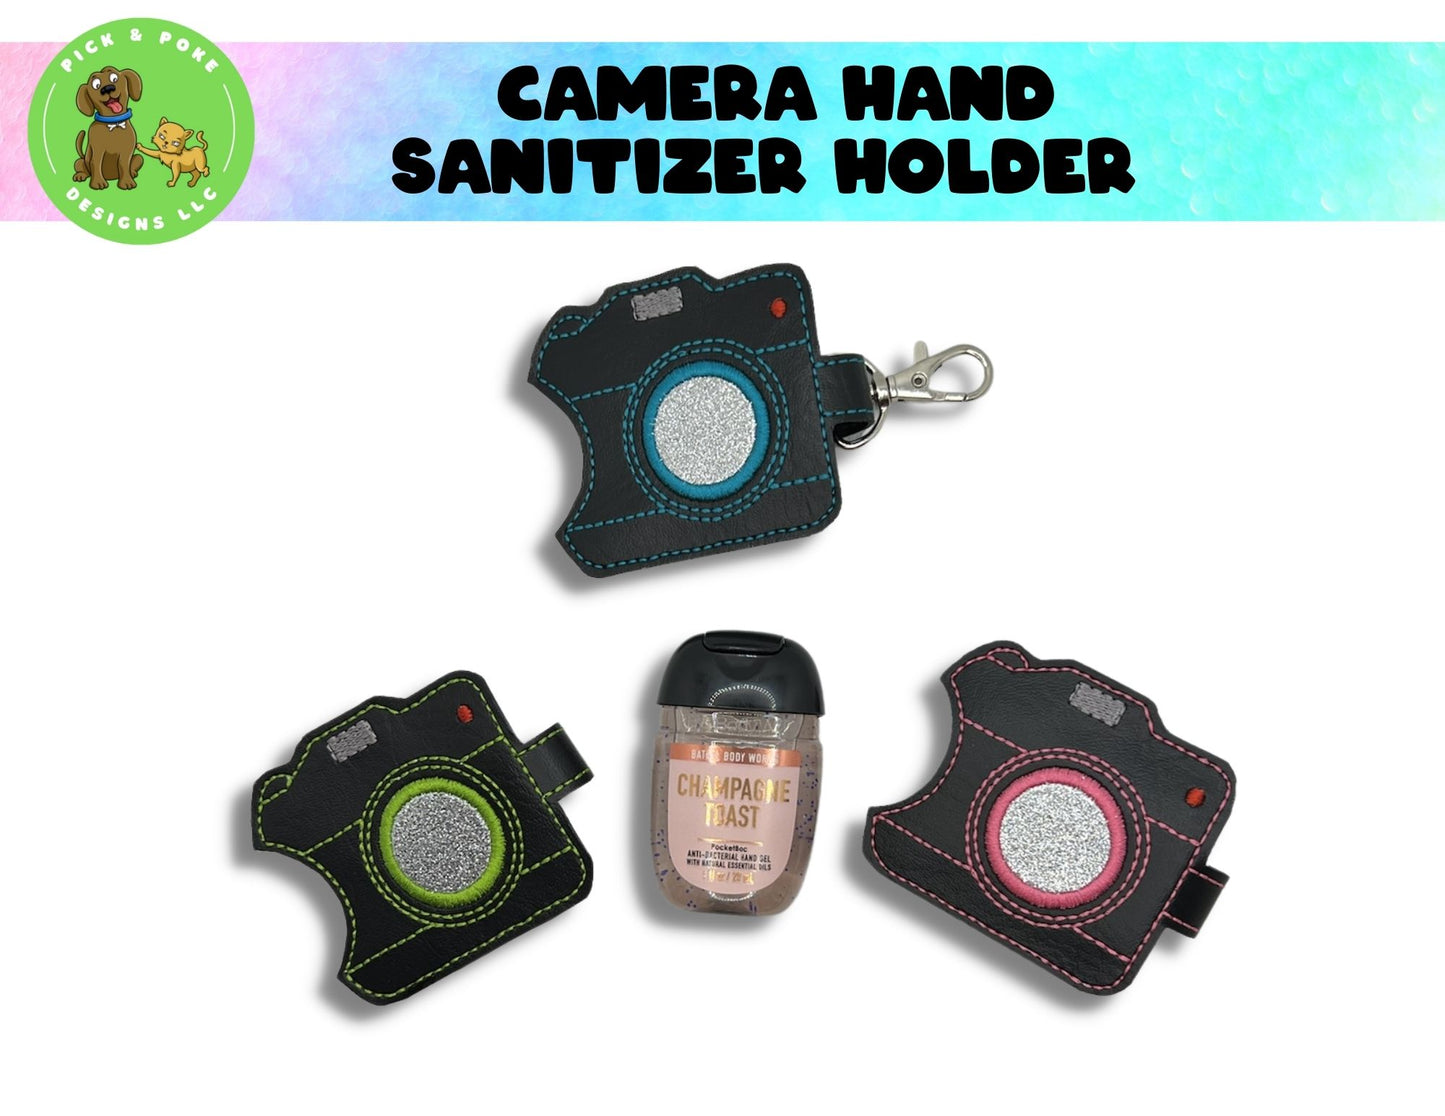 Retro camera hand sanitizer case has a lobster claw keychain clip for attaching to keys or purse